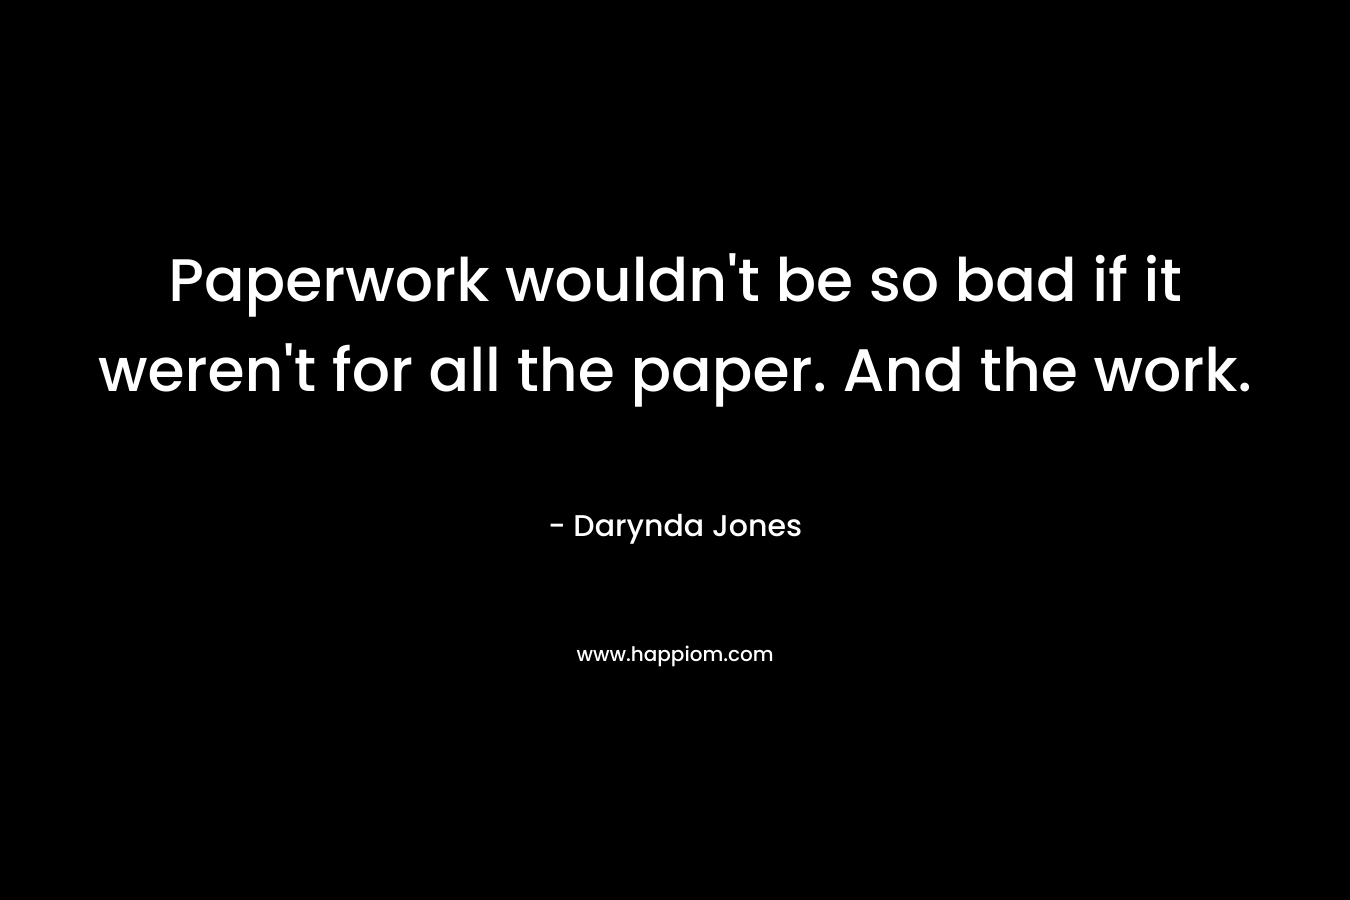 Paperwork wouldn't be so bad if it weren't for all the paper. And the work.